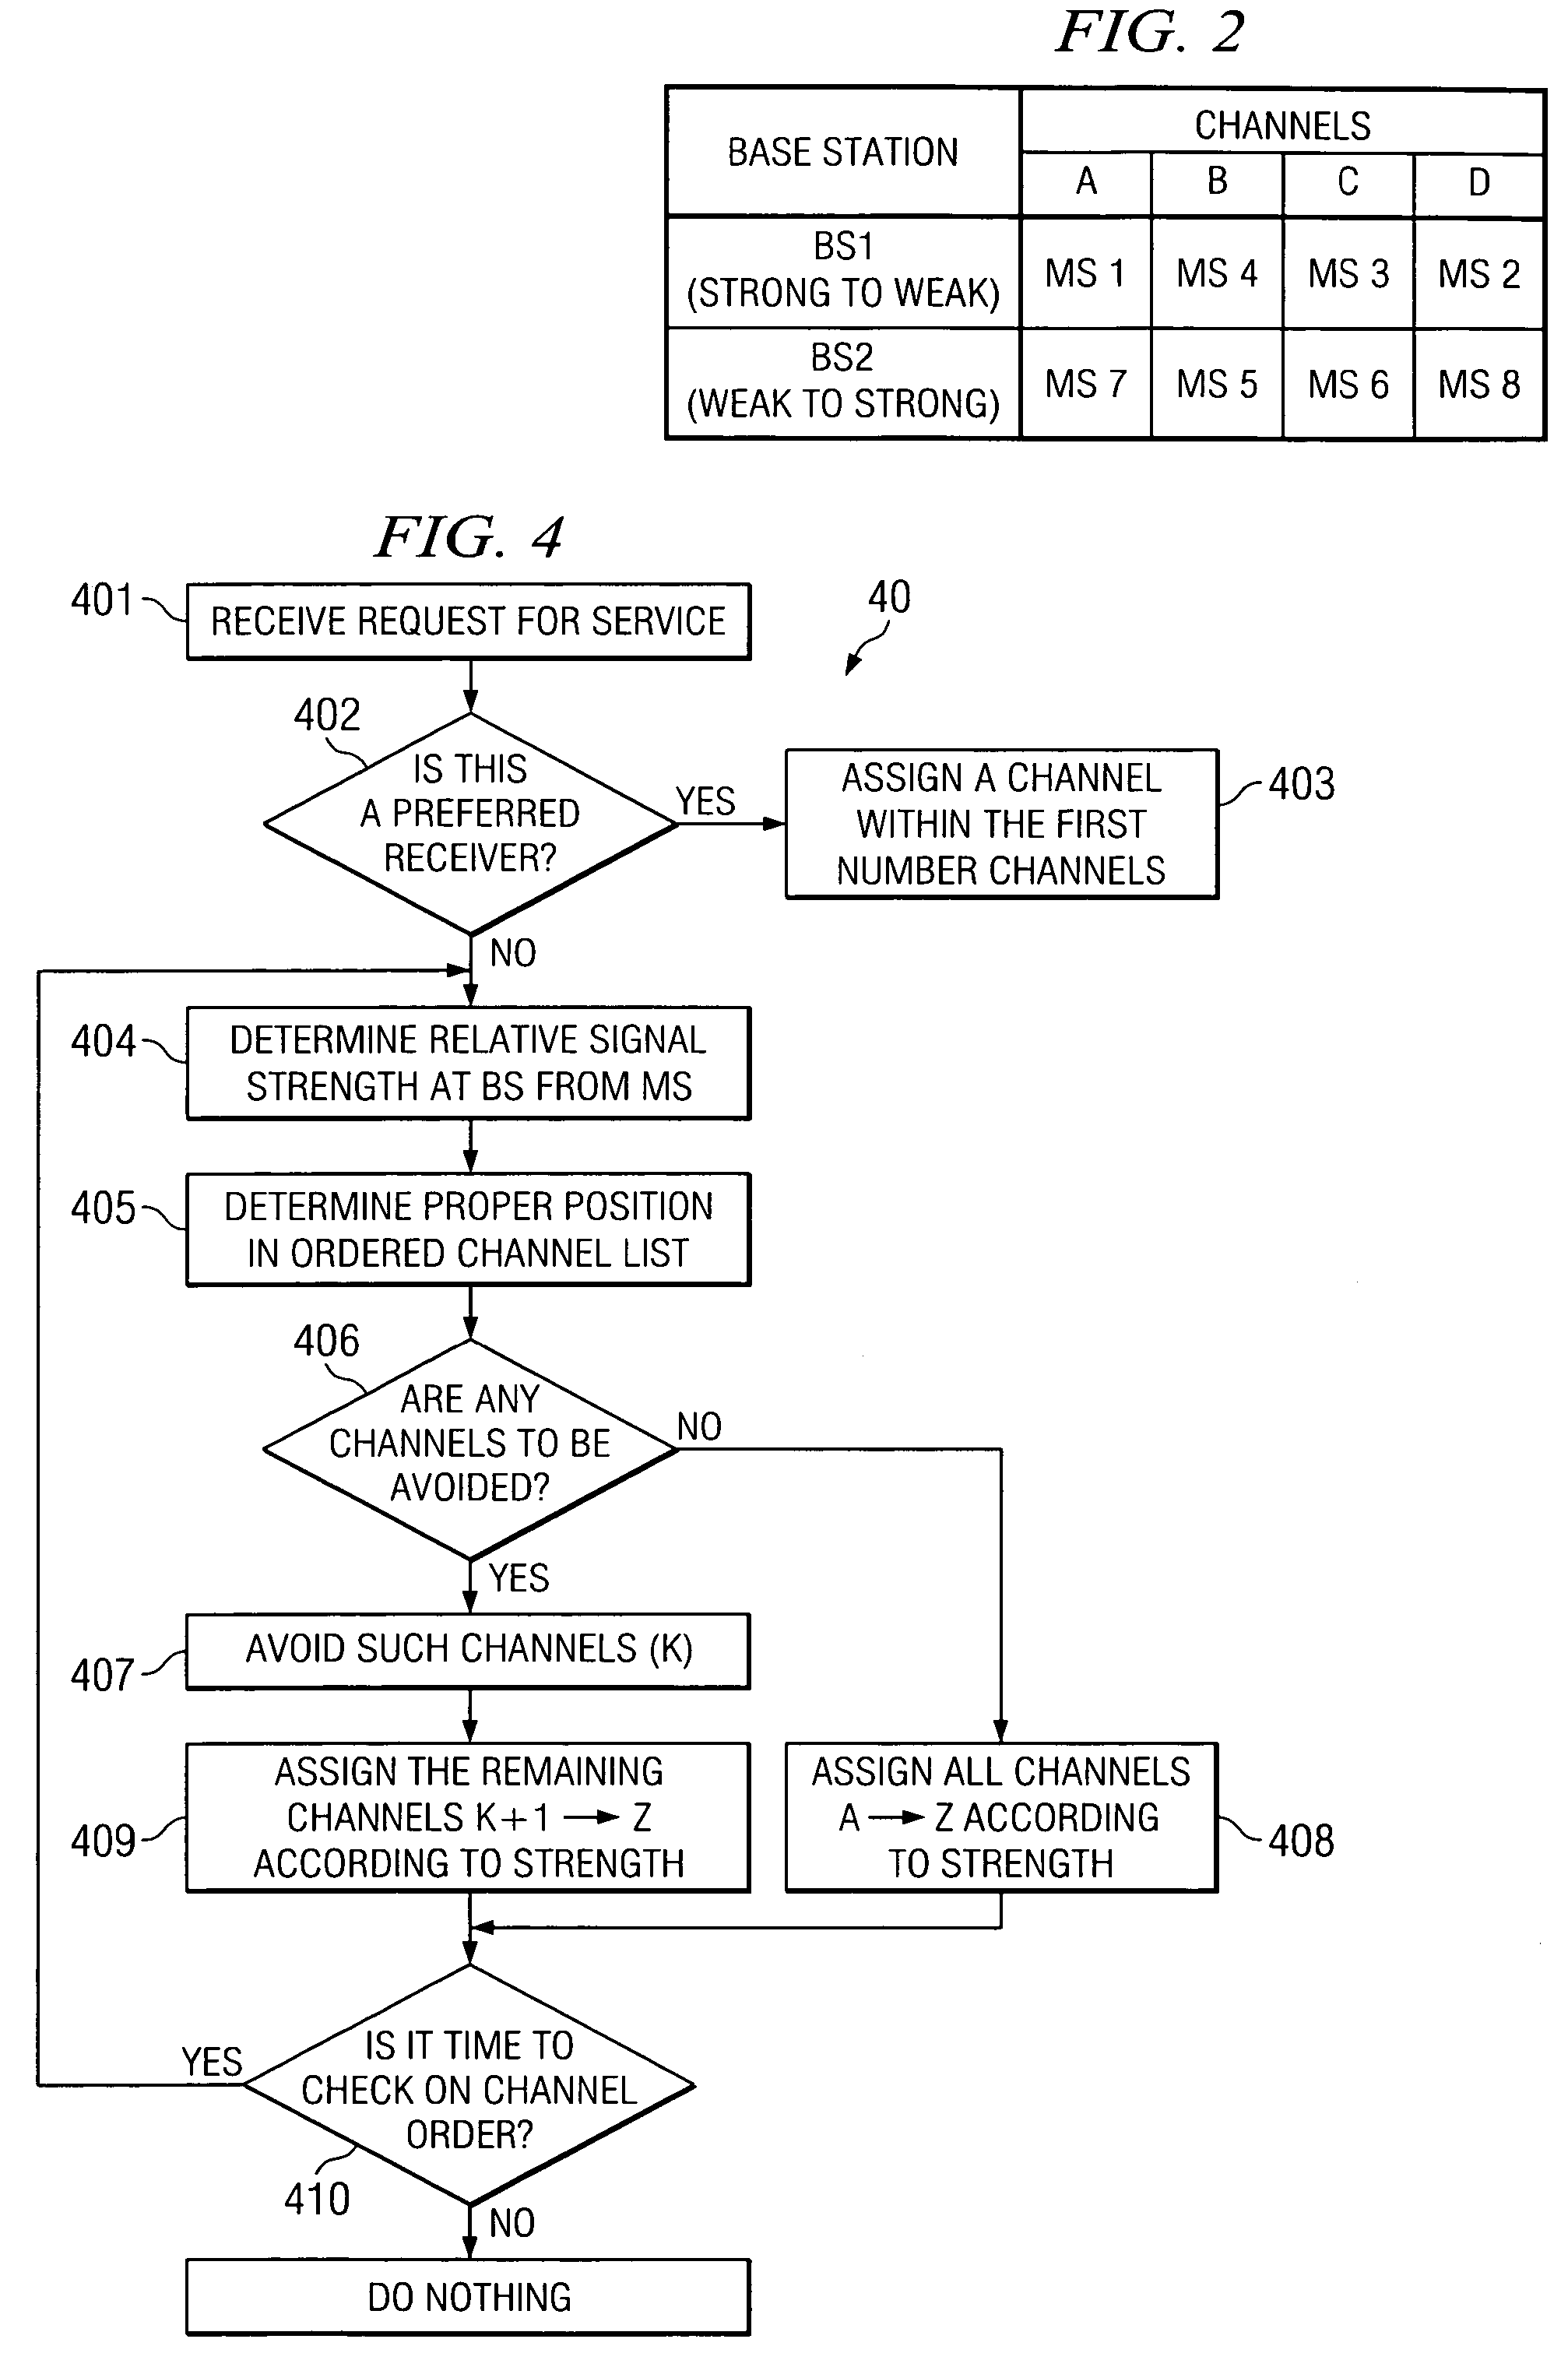 Systems and methods for making channel assignments to reduce interference and increase capacity of wireless networks